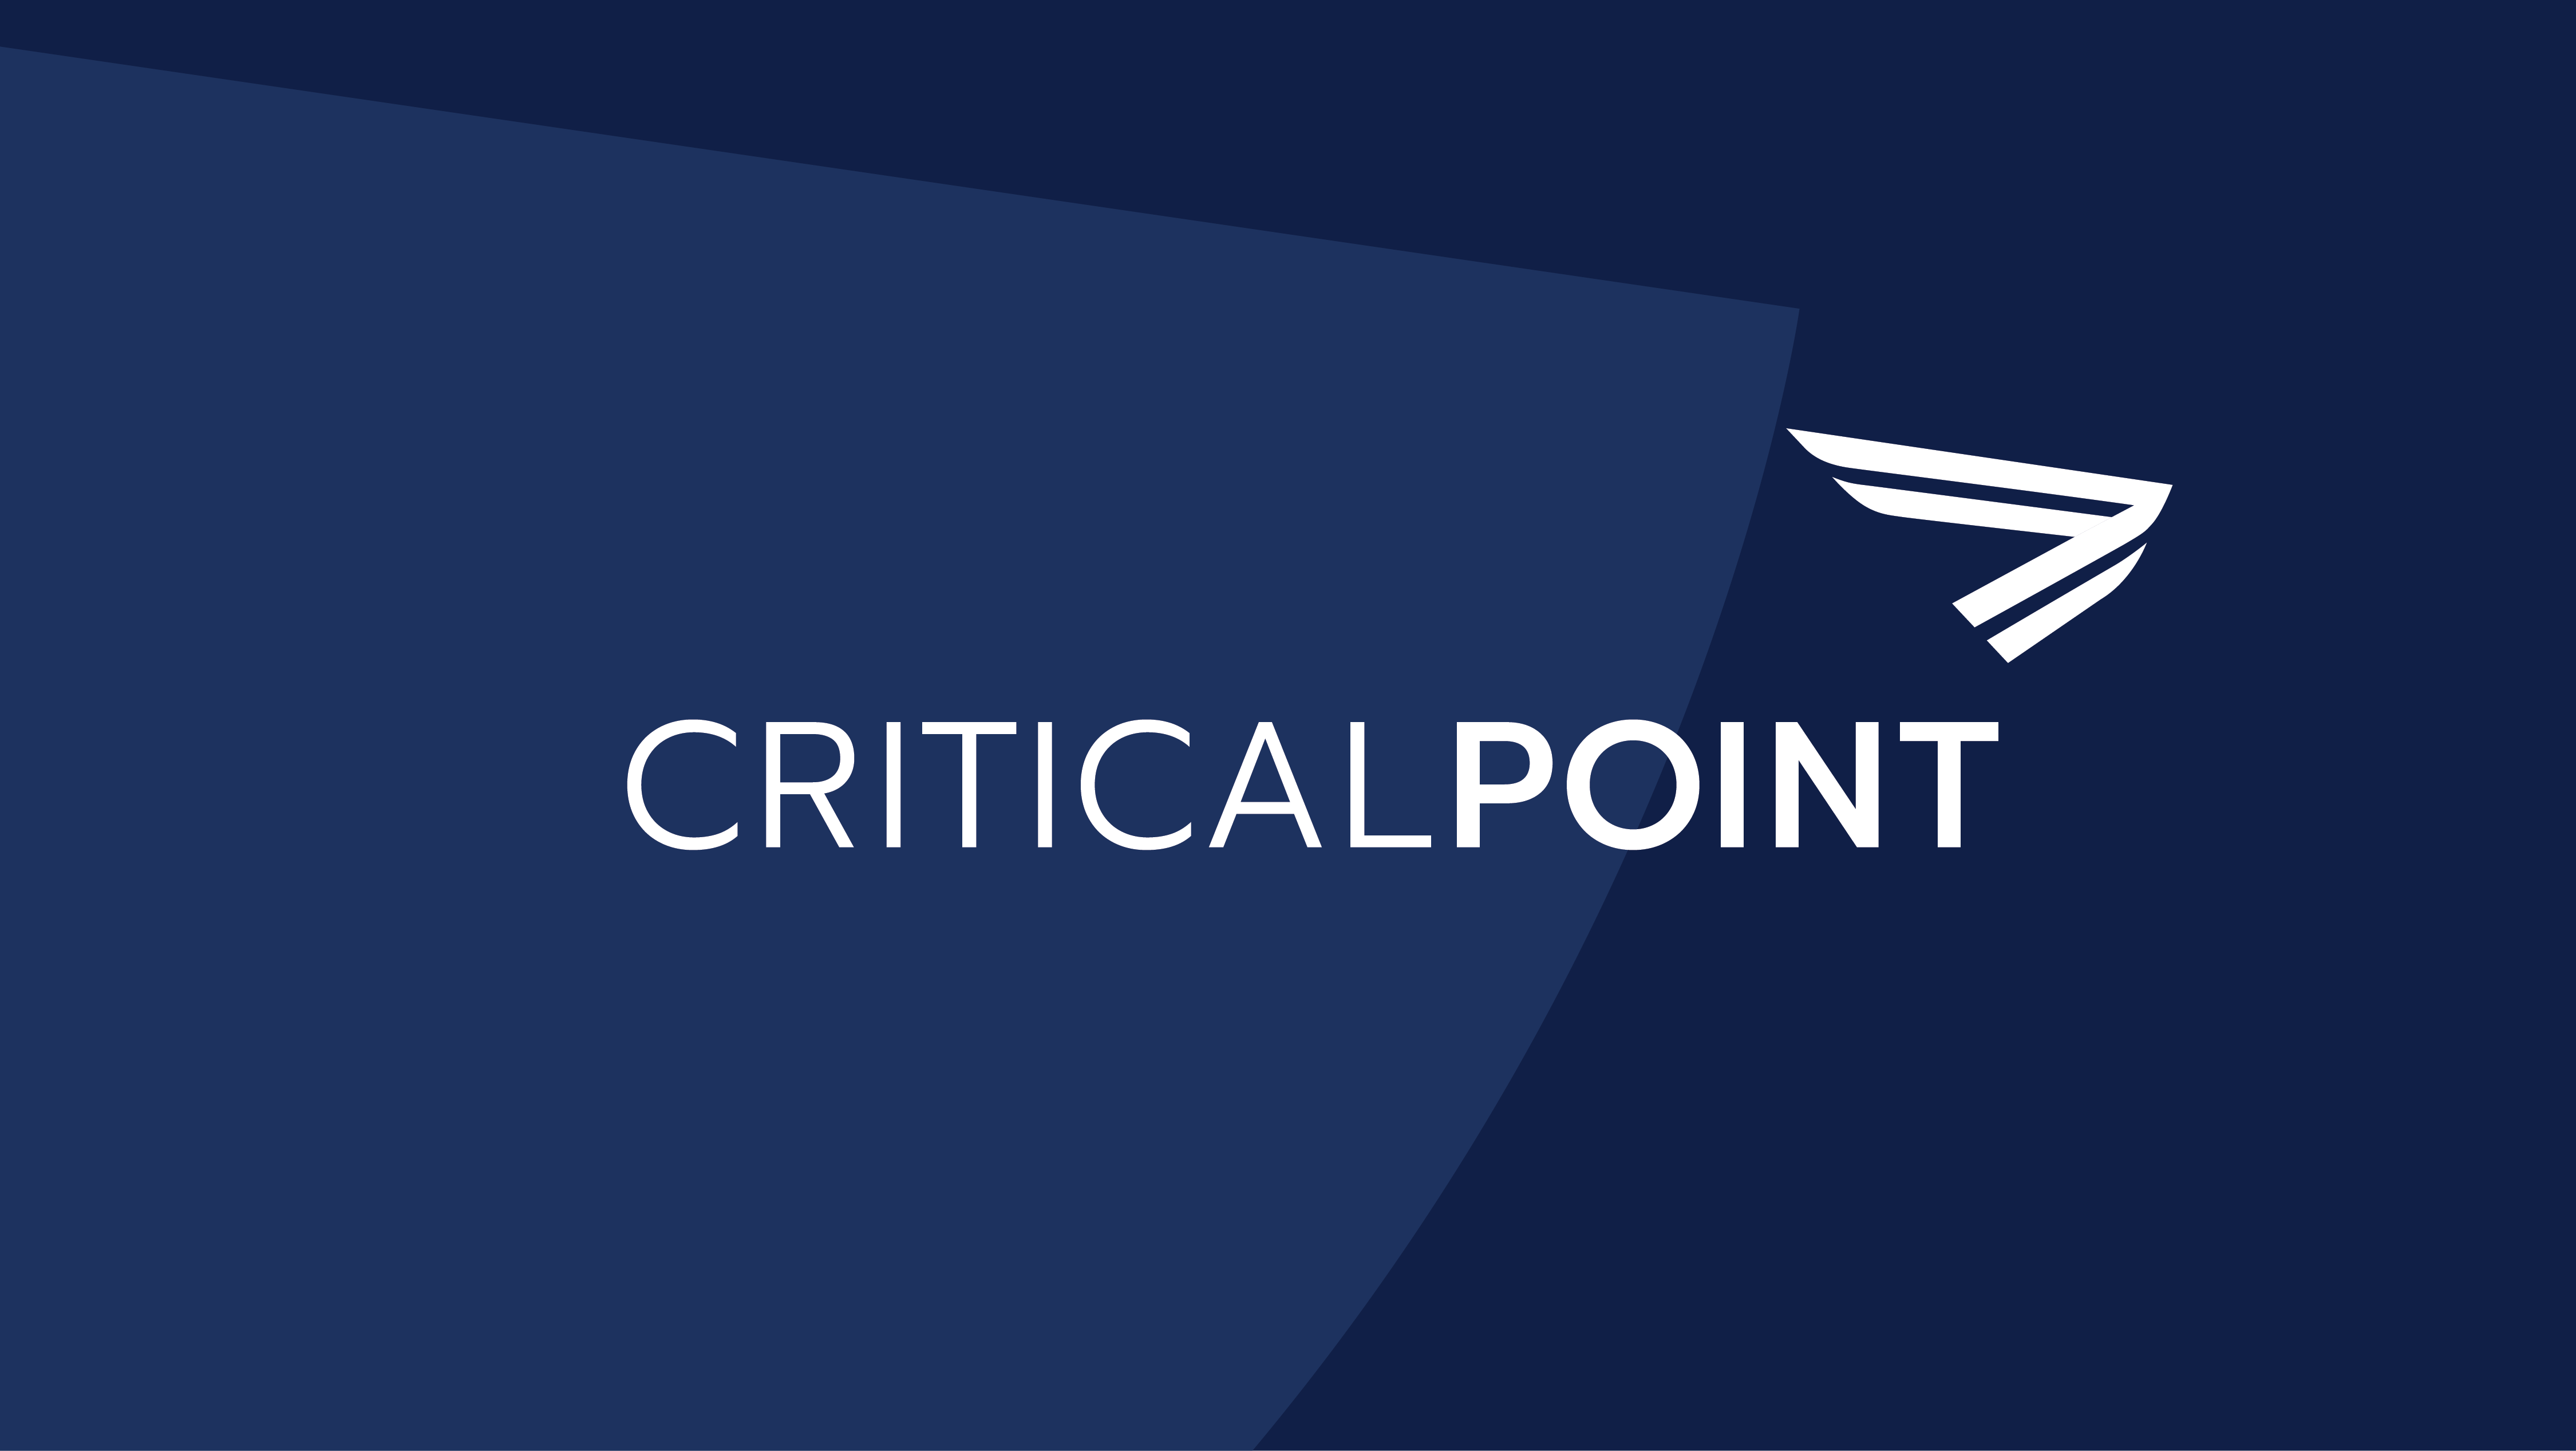 CriticalPoint is excited to reveal its brand refresh and new website